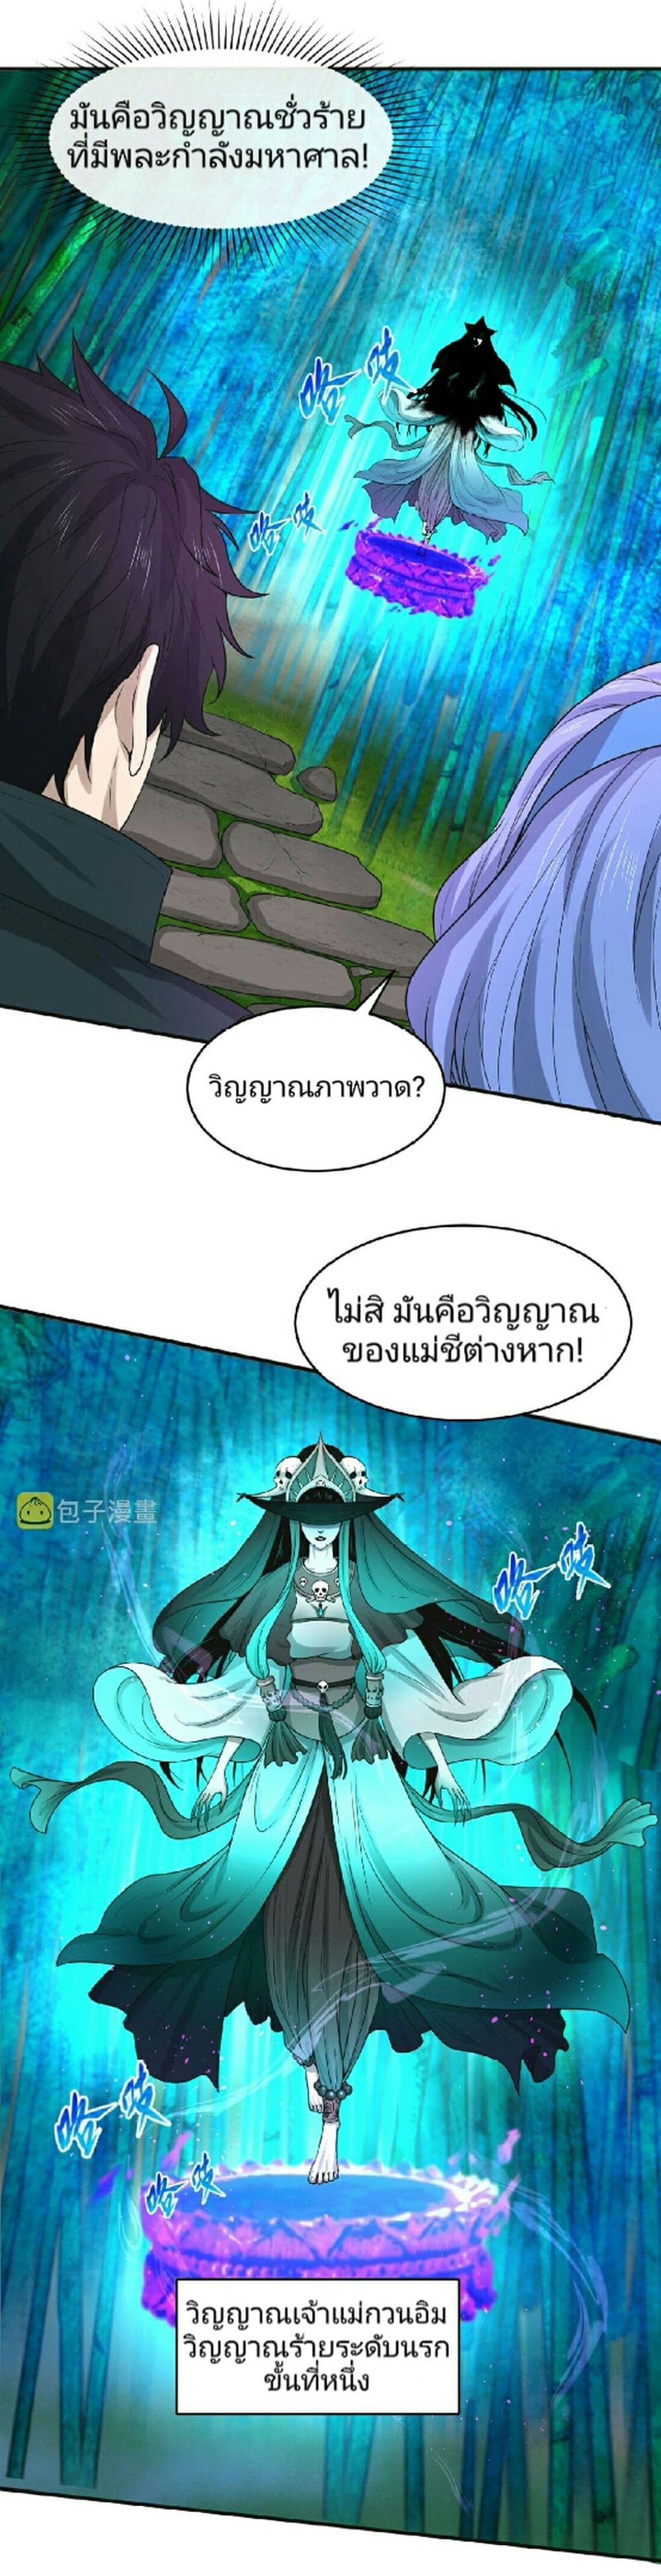 The Age of Ghost Spirits à¸à¸­à¸à¸à¸µà¹ 50 (10)